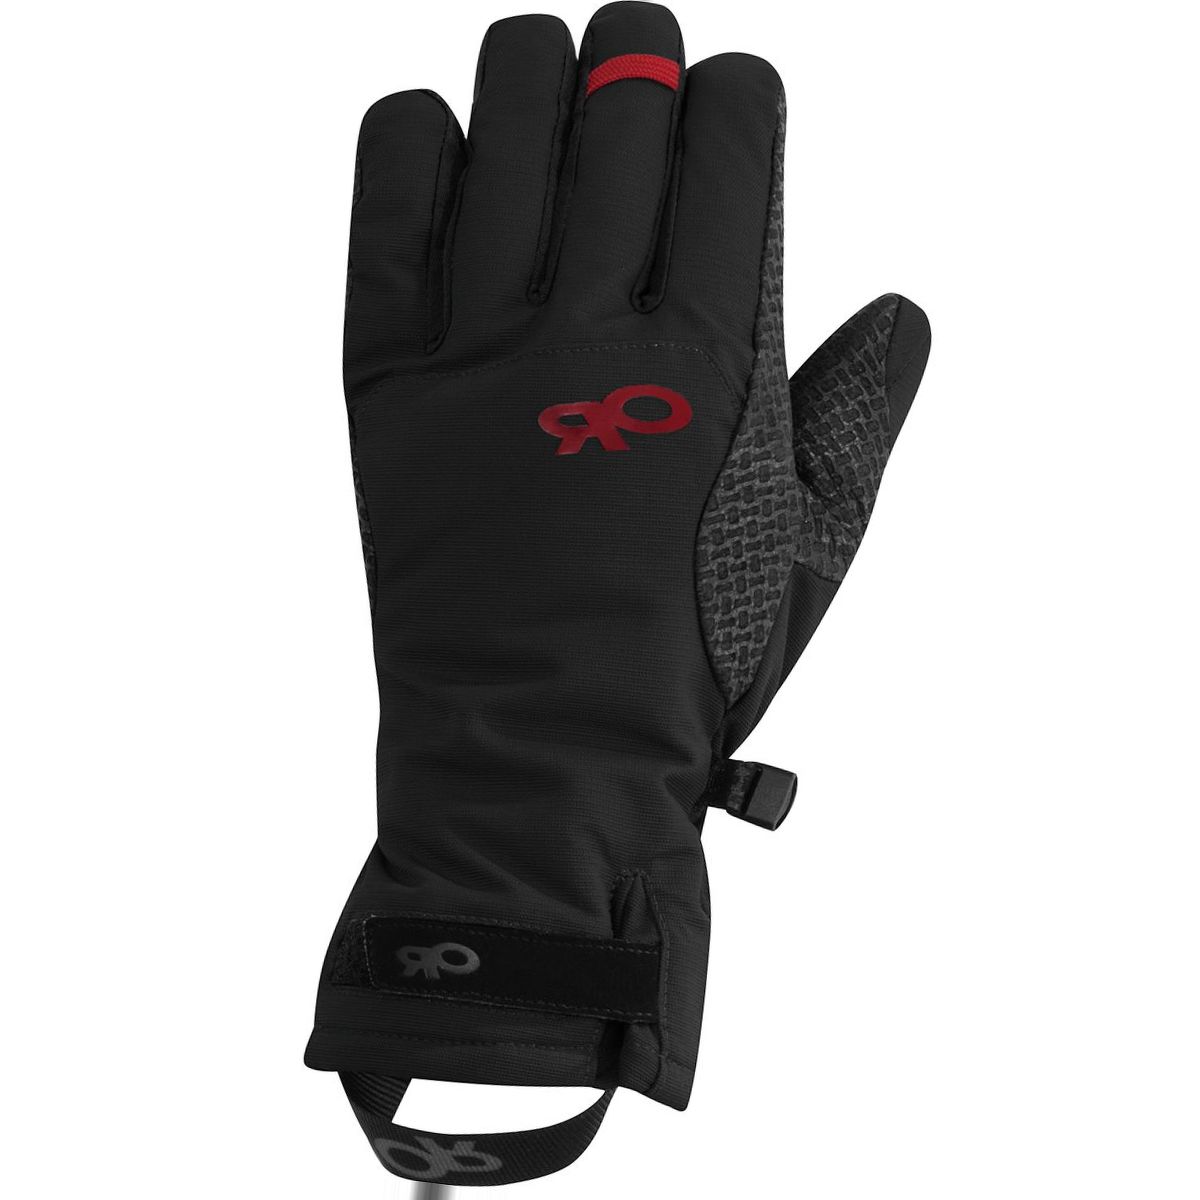 Outdoor Research Ouray Aerogel Ice Glove - Women's